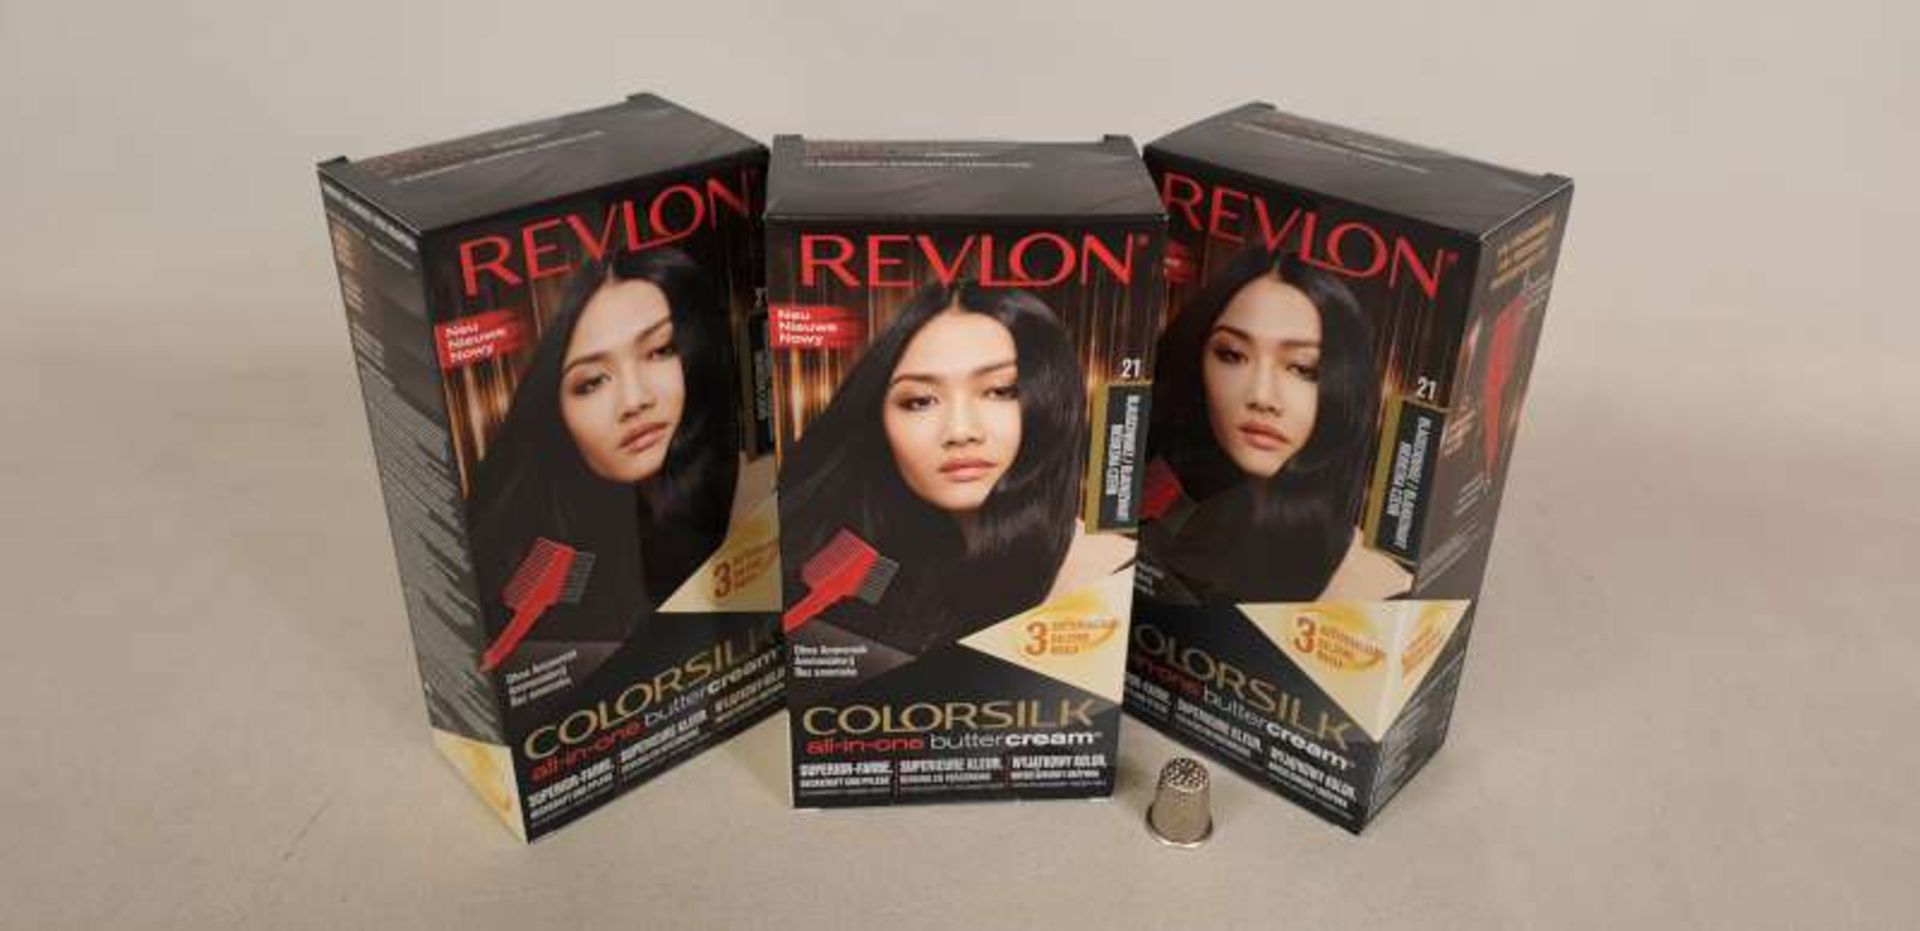 48 X REVLON COLOUR SILK ALL IN ONE BUTTER CREAM HAIR DYE IN 4 BOXES